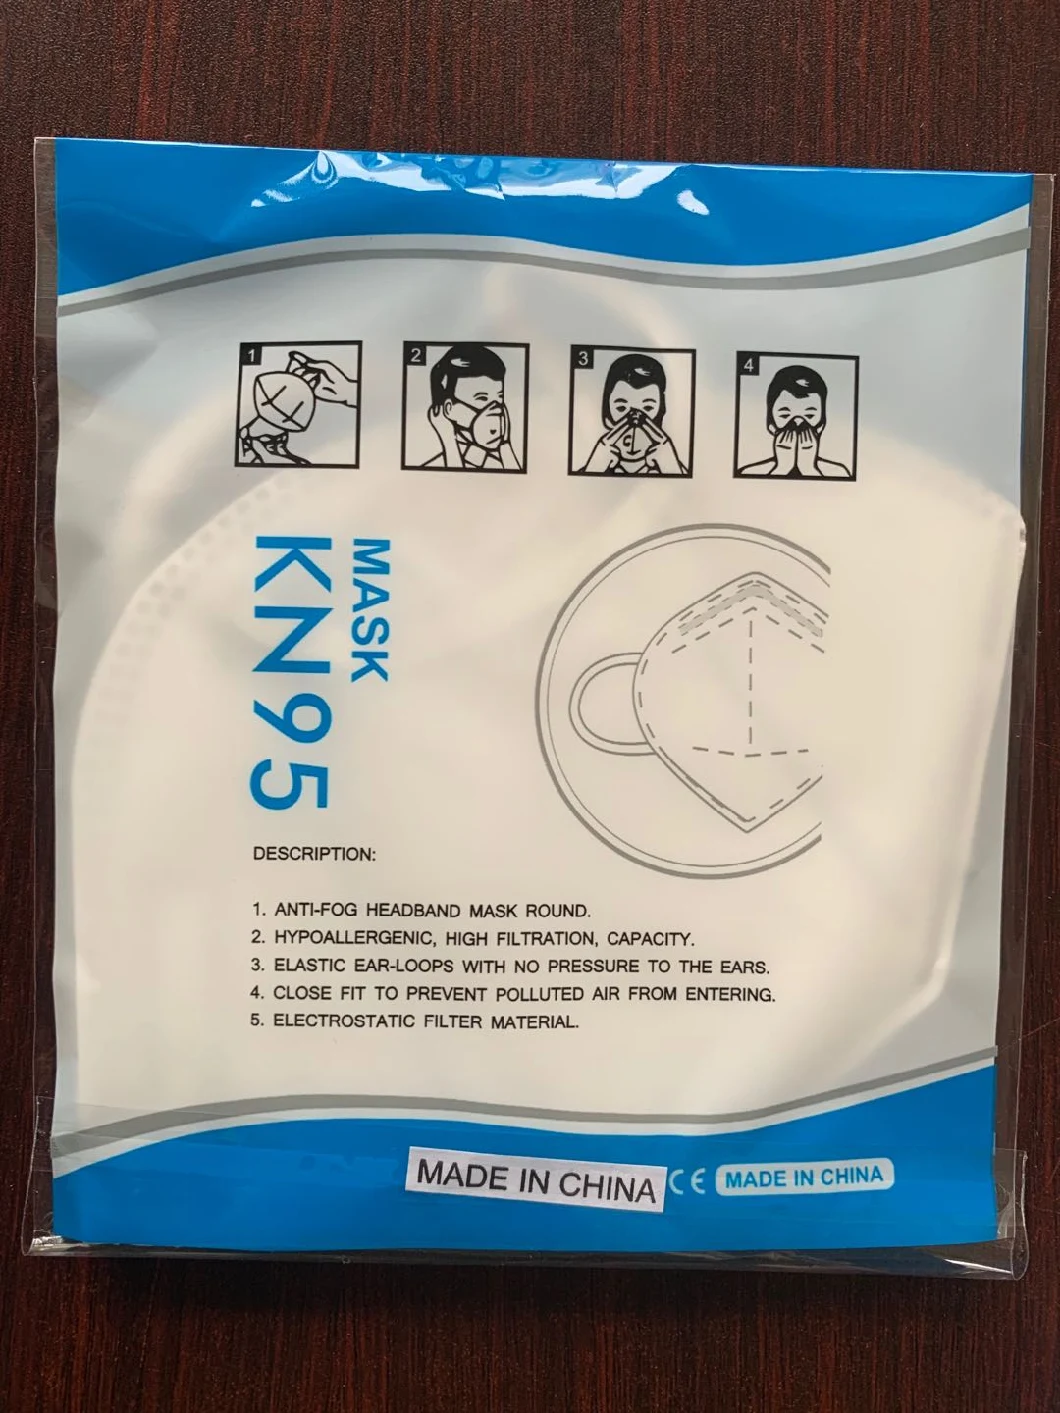 High Quality Pm2.5 Air Filtered 5 Ply Kn-95 Non-Medical Disposable Face Mask